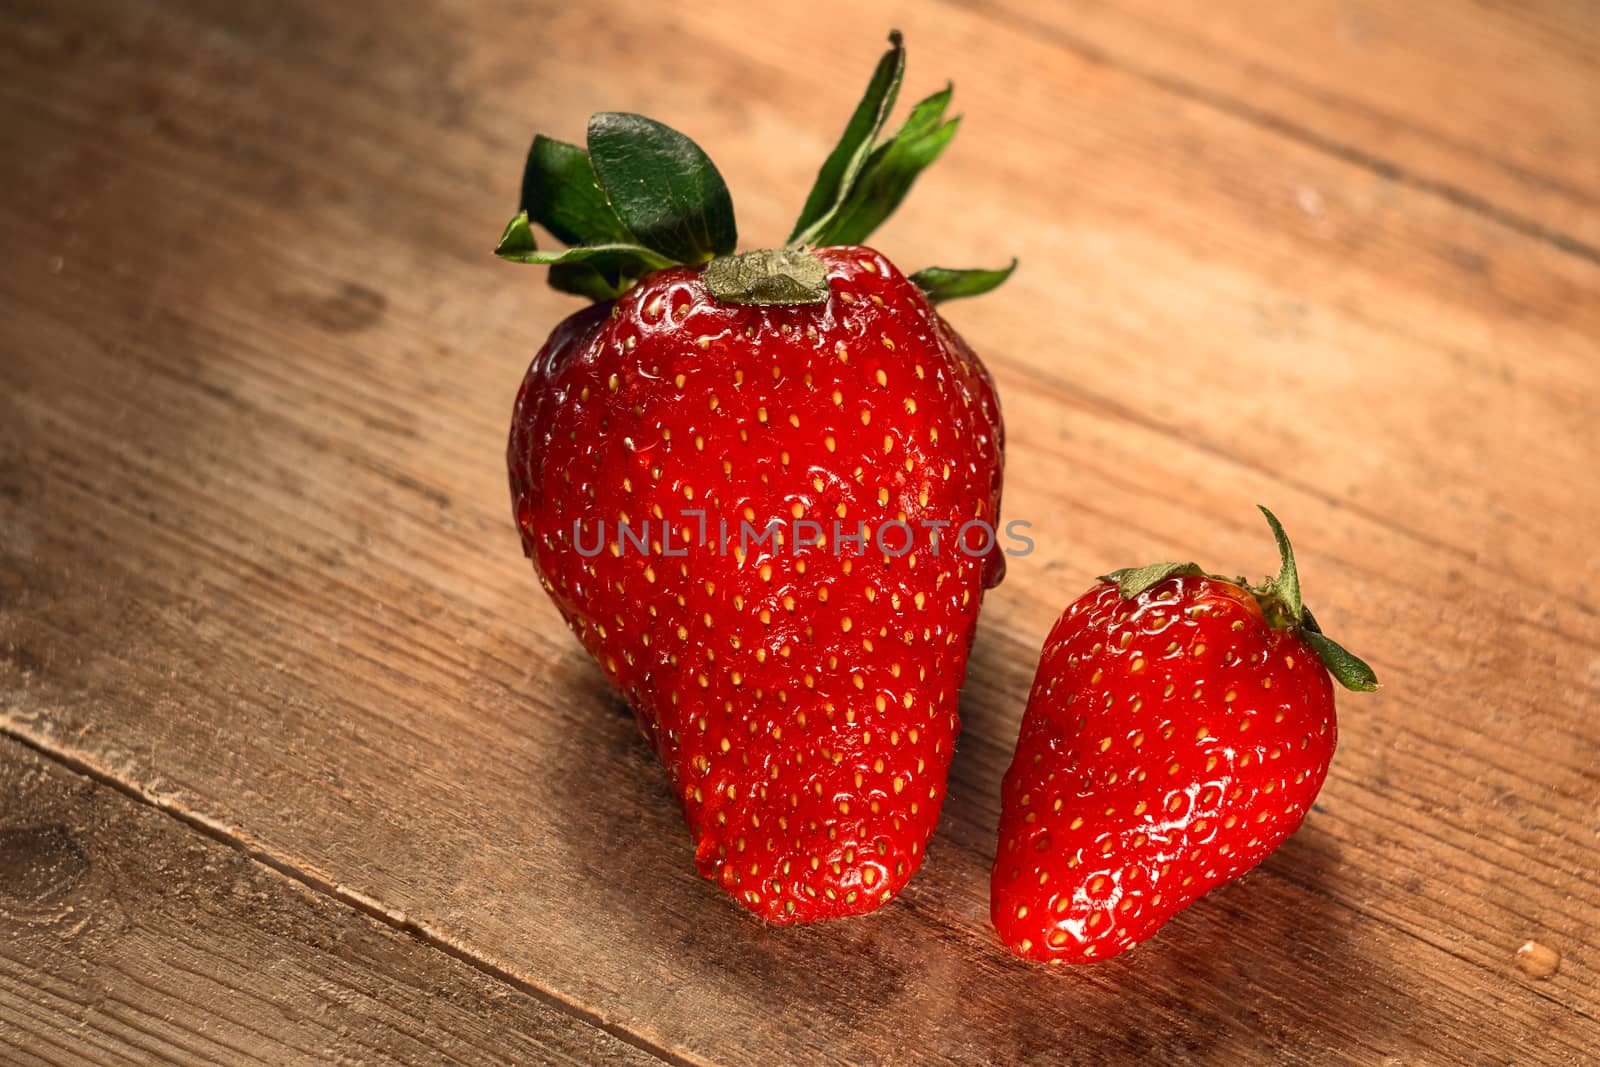 strawberry, red edible fruit of the strawberry plant